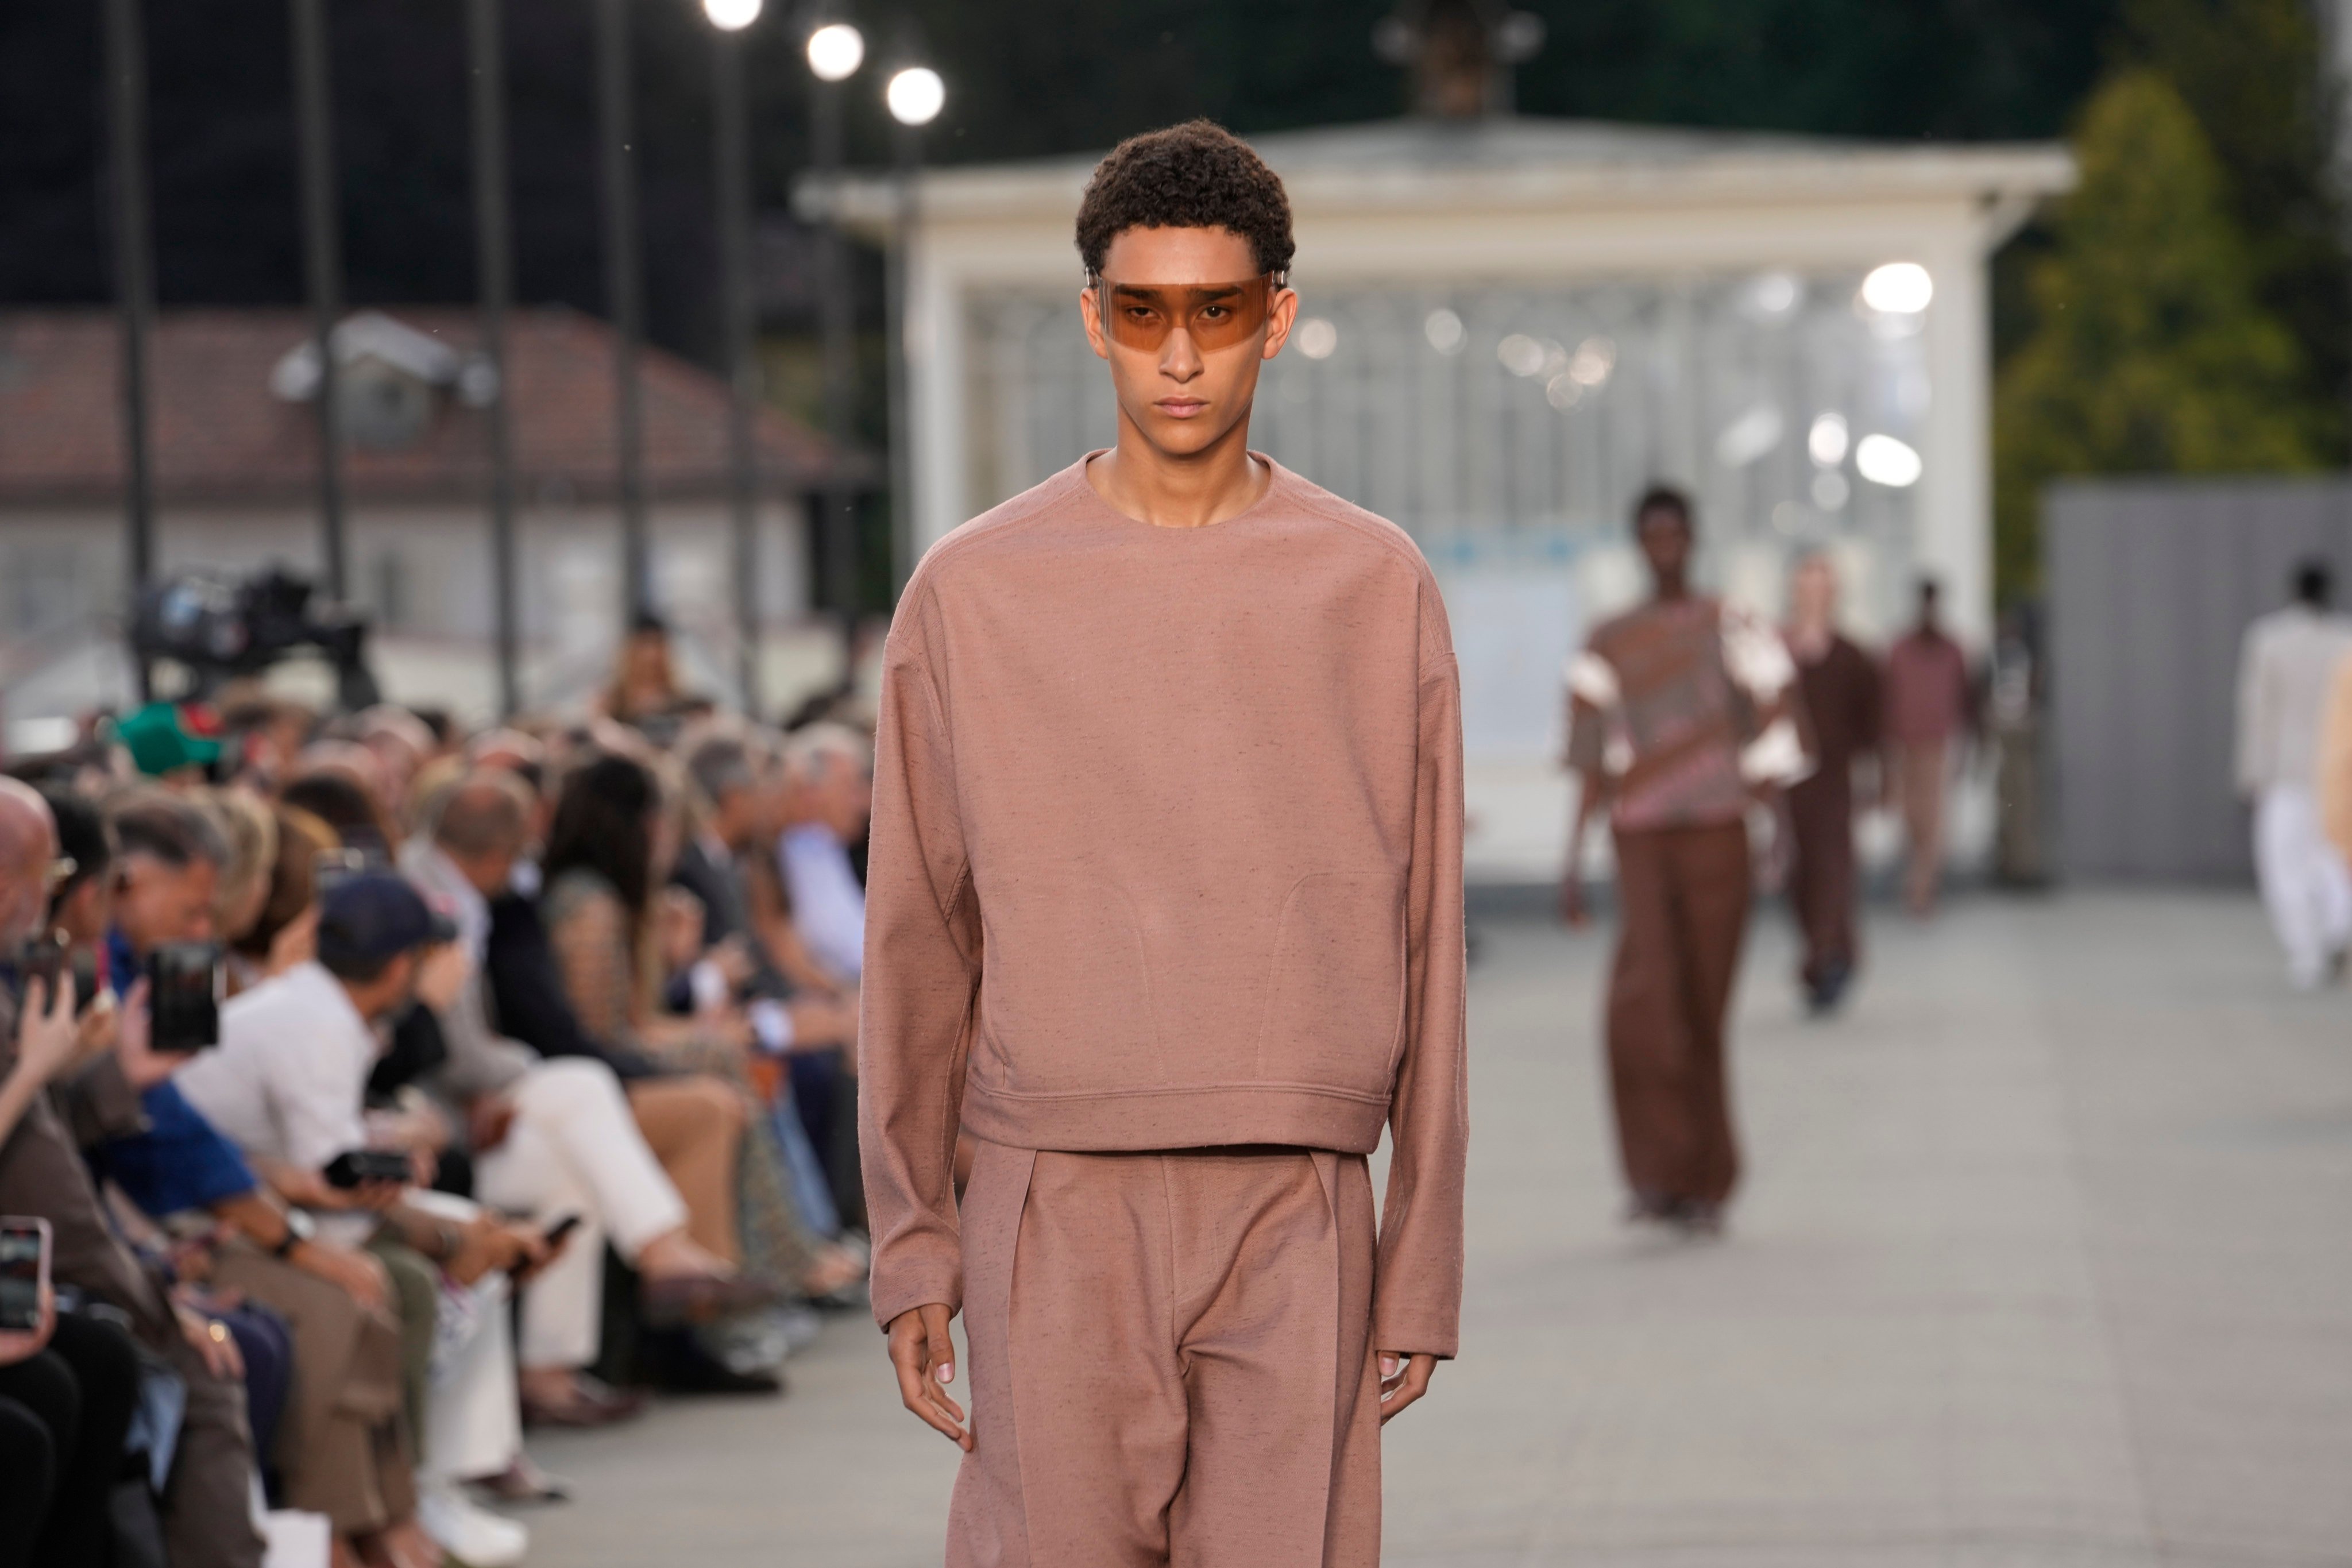 A model dons a head-to-toe neutral palette for Zegna men’s spring/summer 2023 collection presented in in Trivero, near Biella in northern Italy, on June 20. Photo: AP